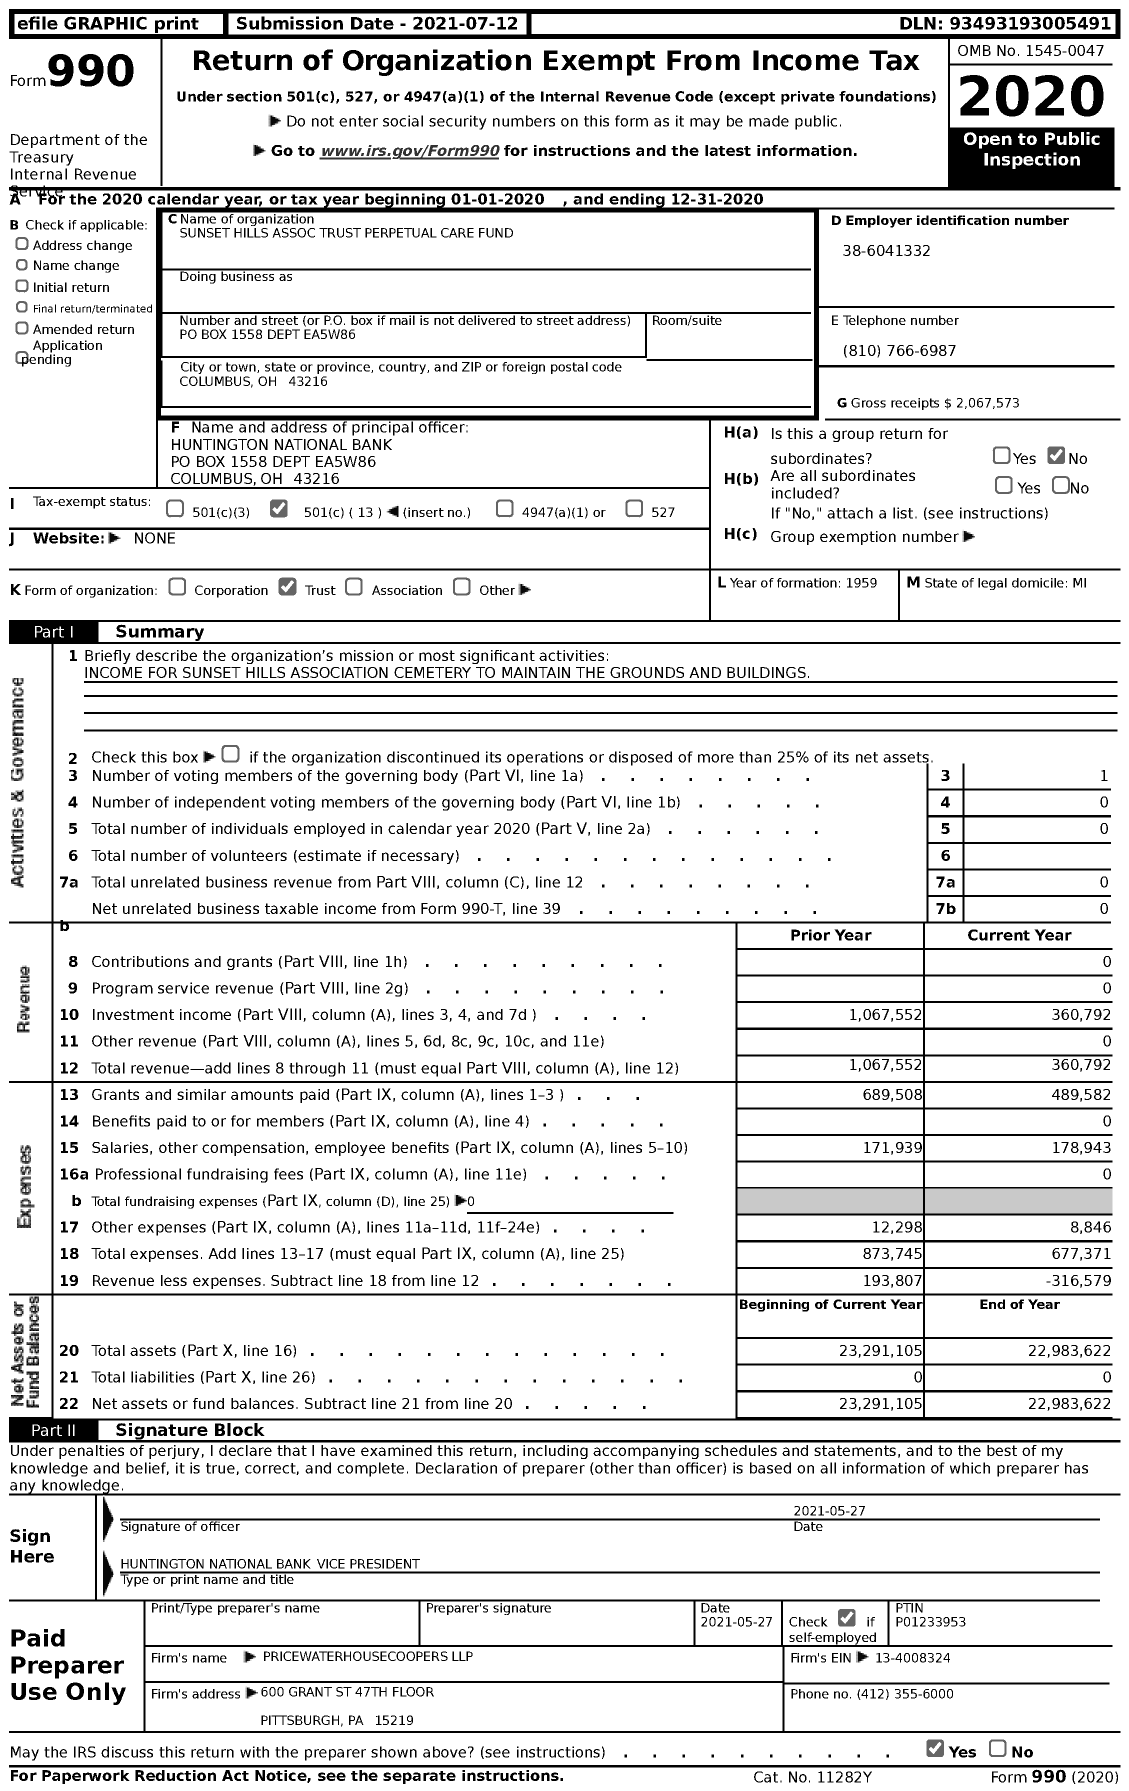 Image of first page of 2020 Form 990 for Sunset Hills Association Trust Perpetual Care Fund